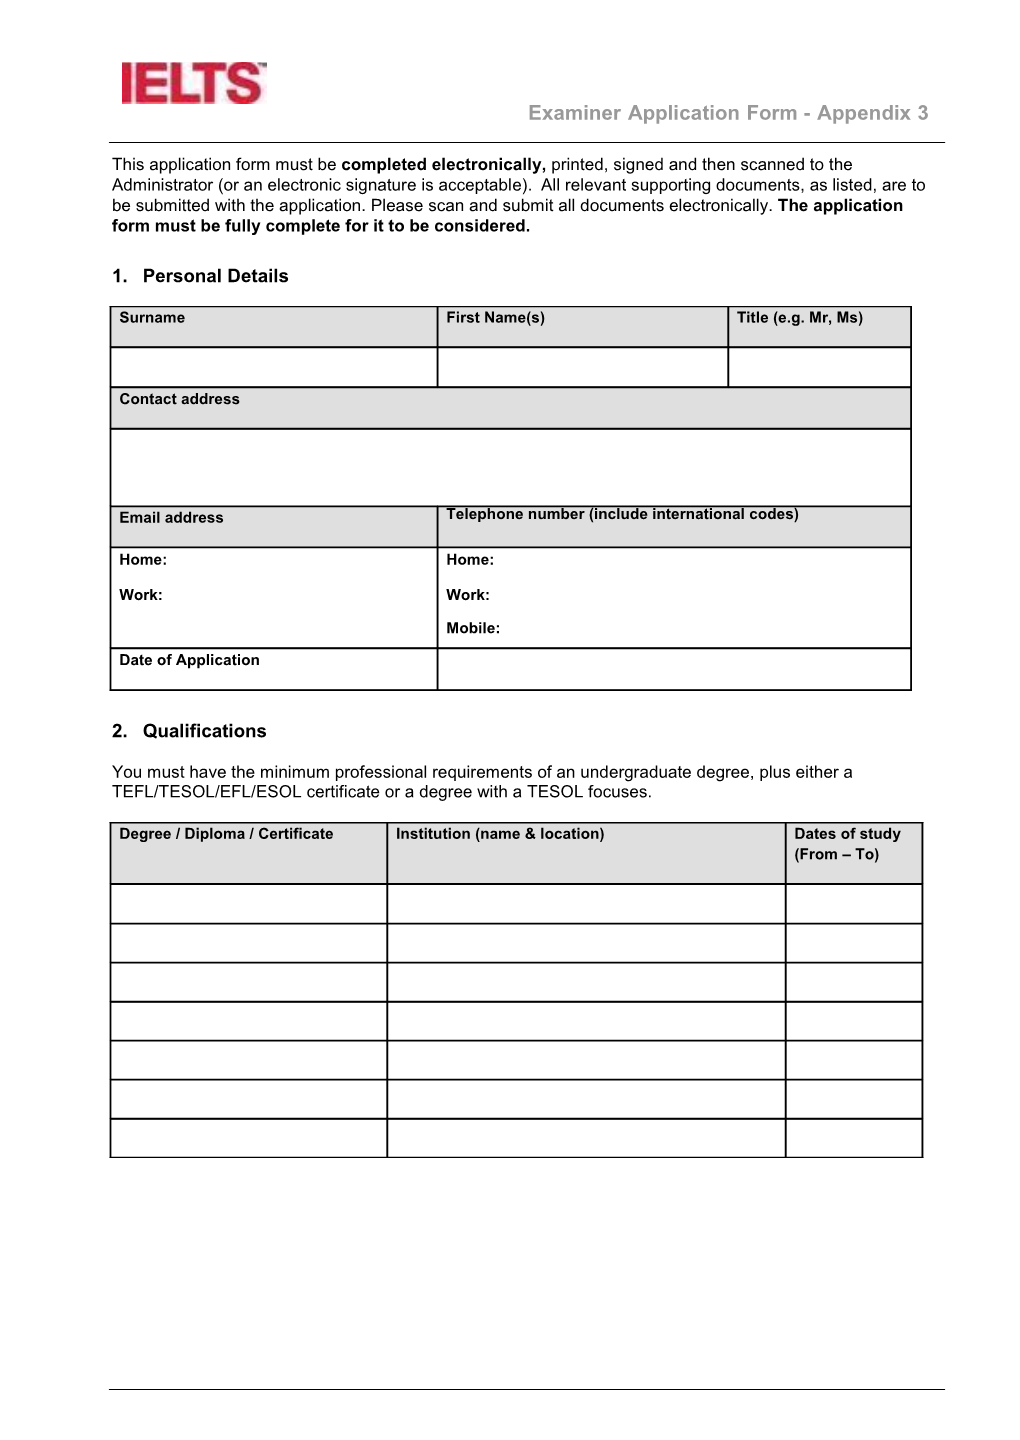 This Application Form Must Be Completed Electronically, Printed, Signed and Then Scanned to The